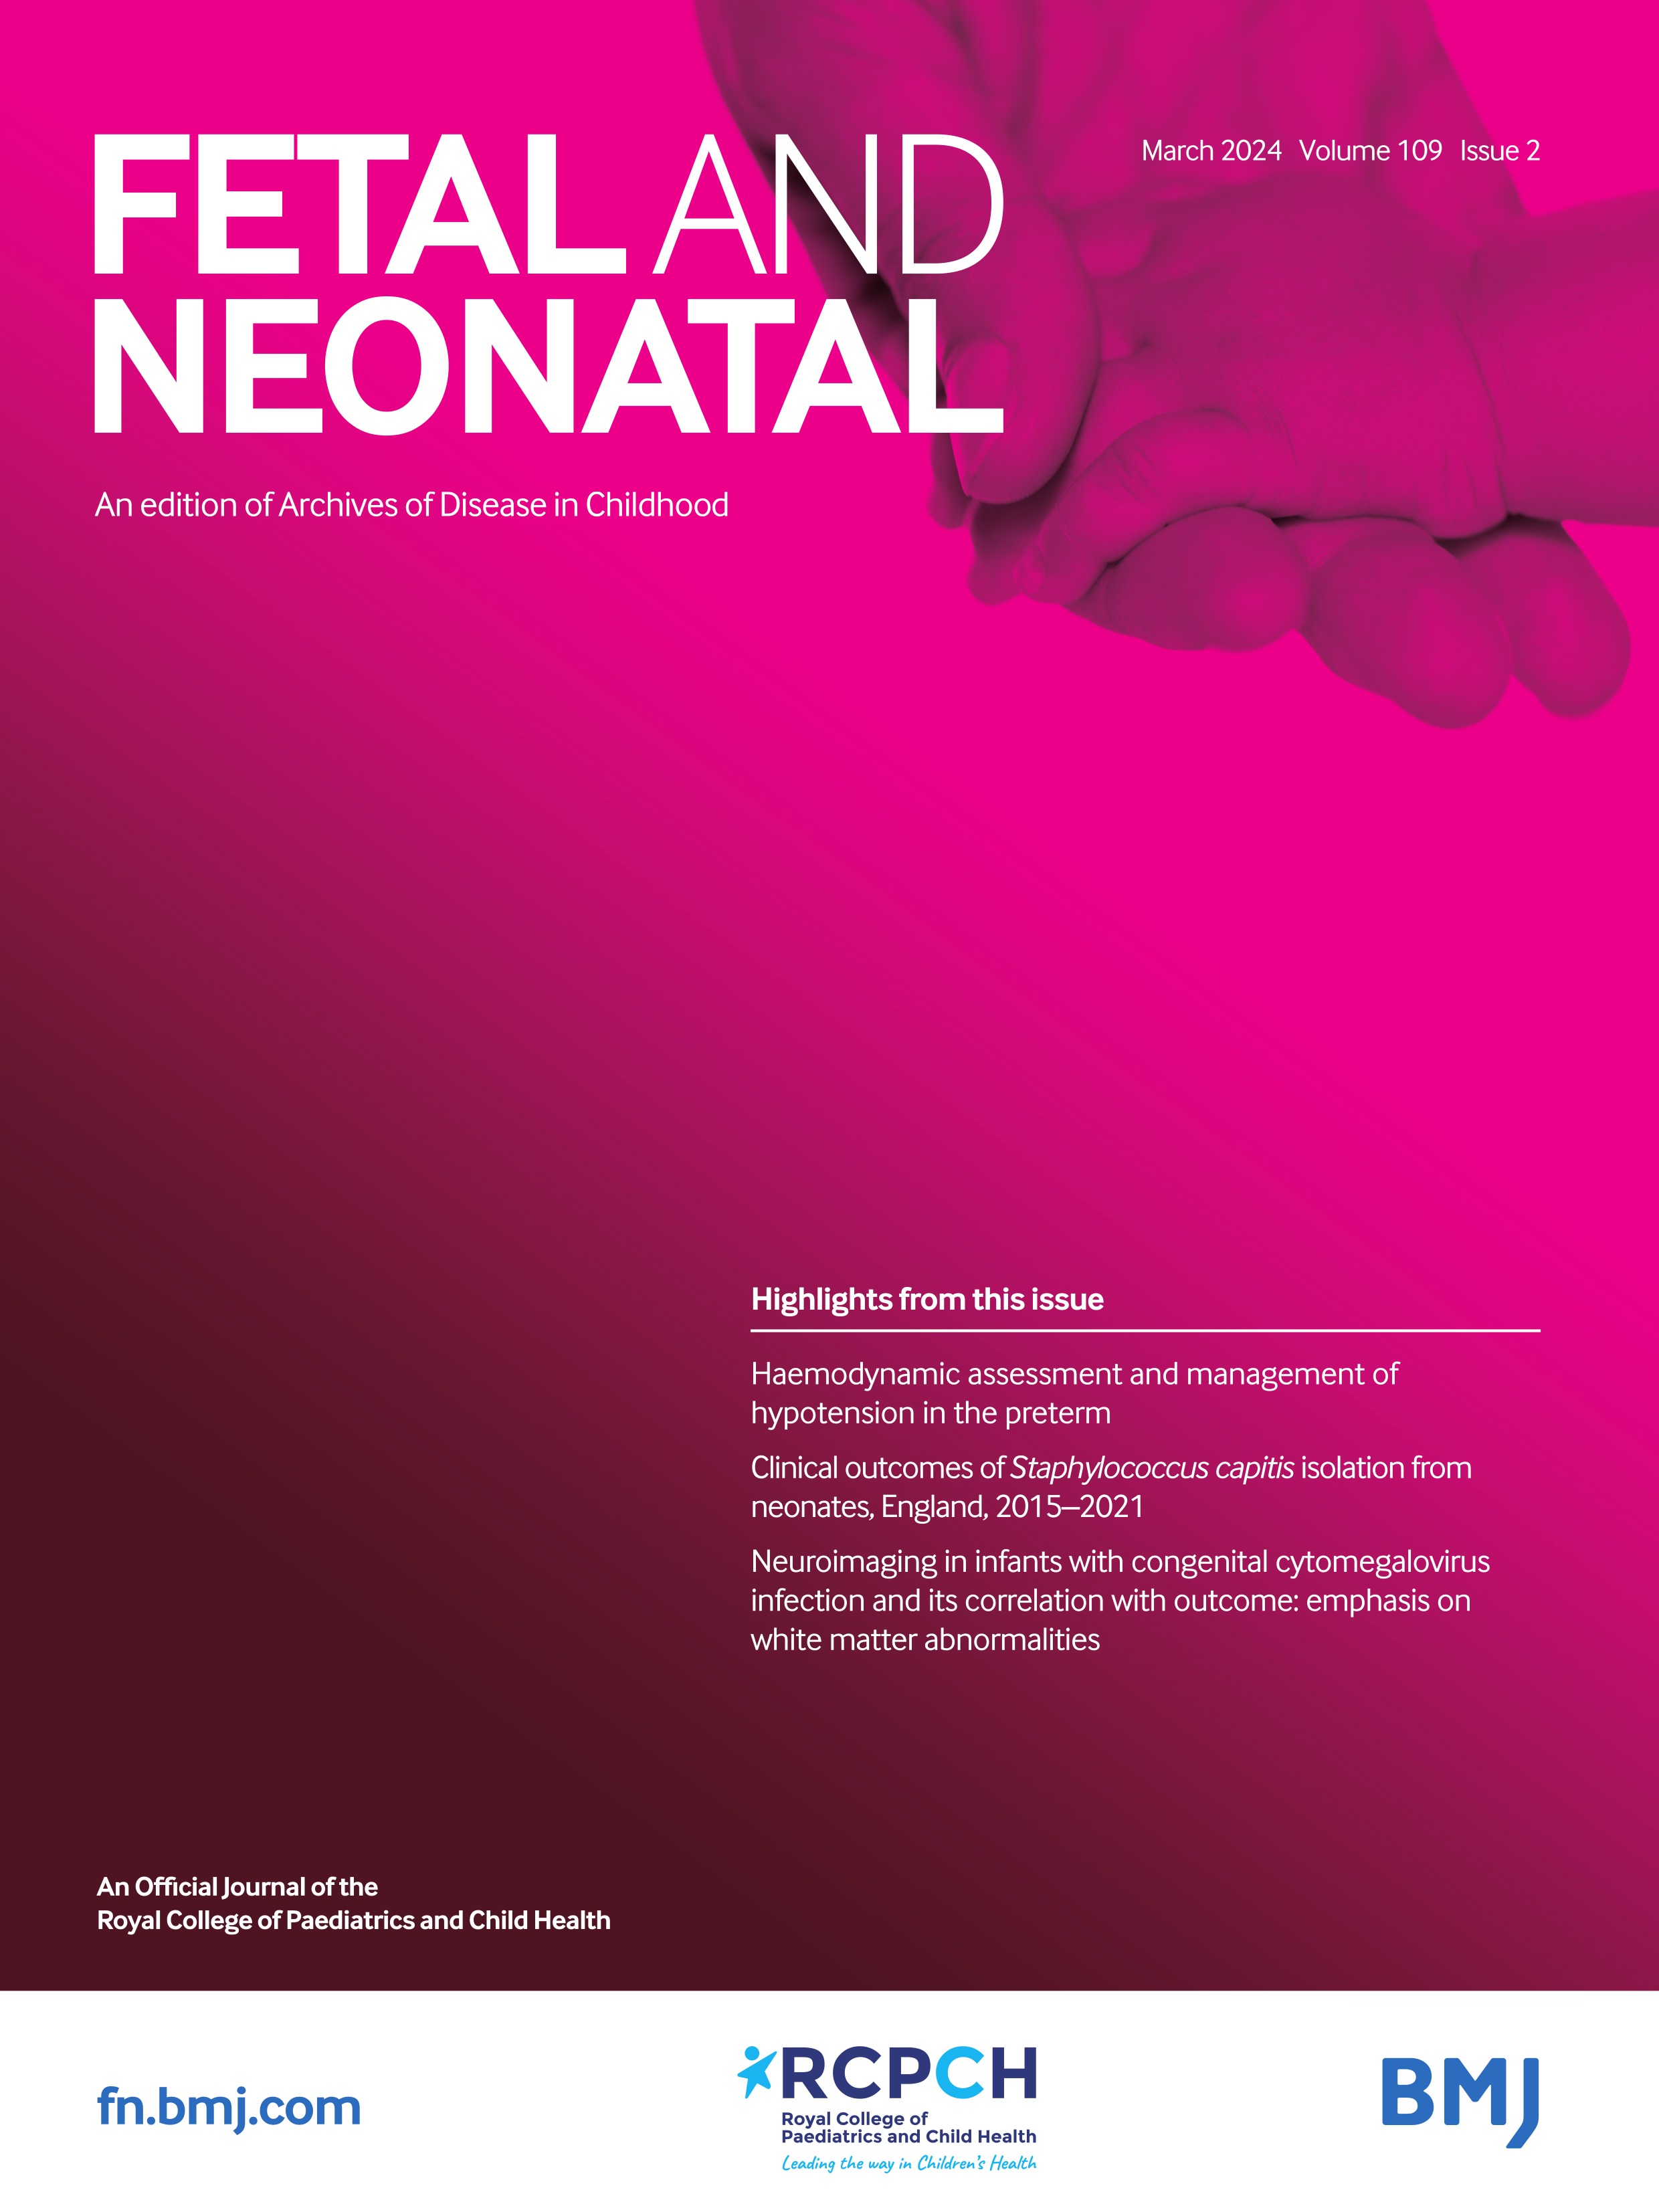 Advance care planning in perinatal settings: national survey of implementation using Normalisation Process Theory